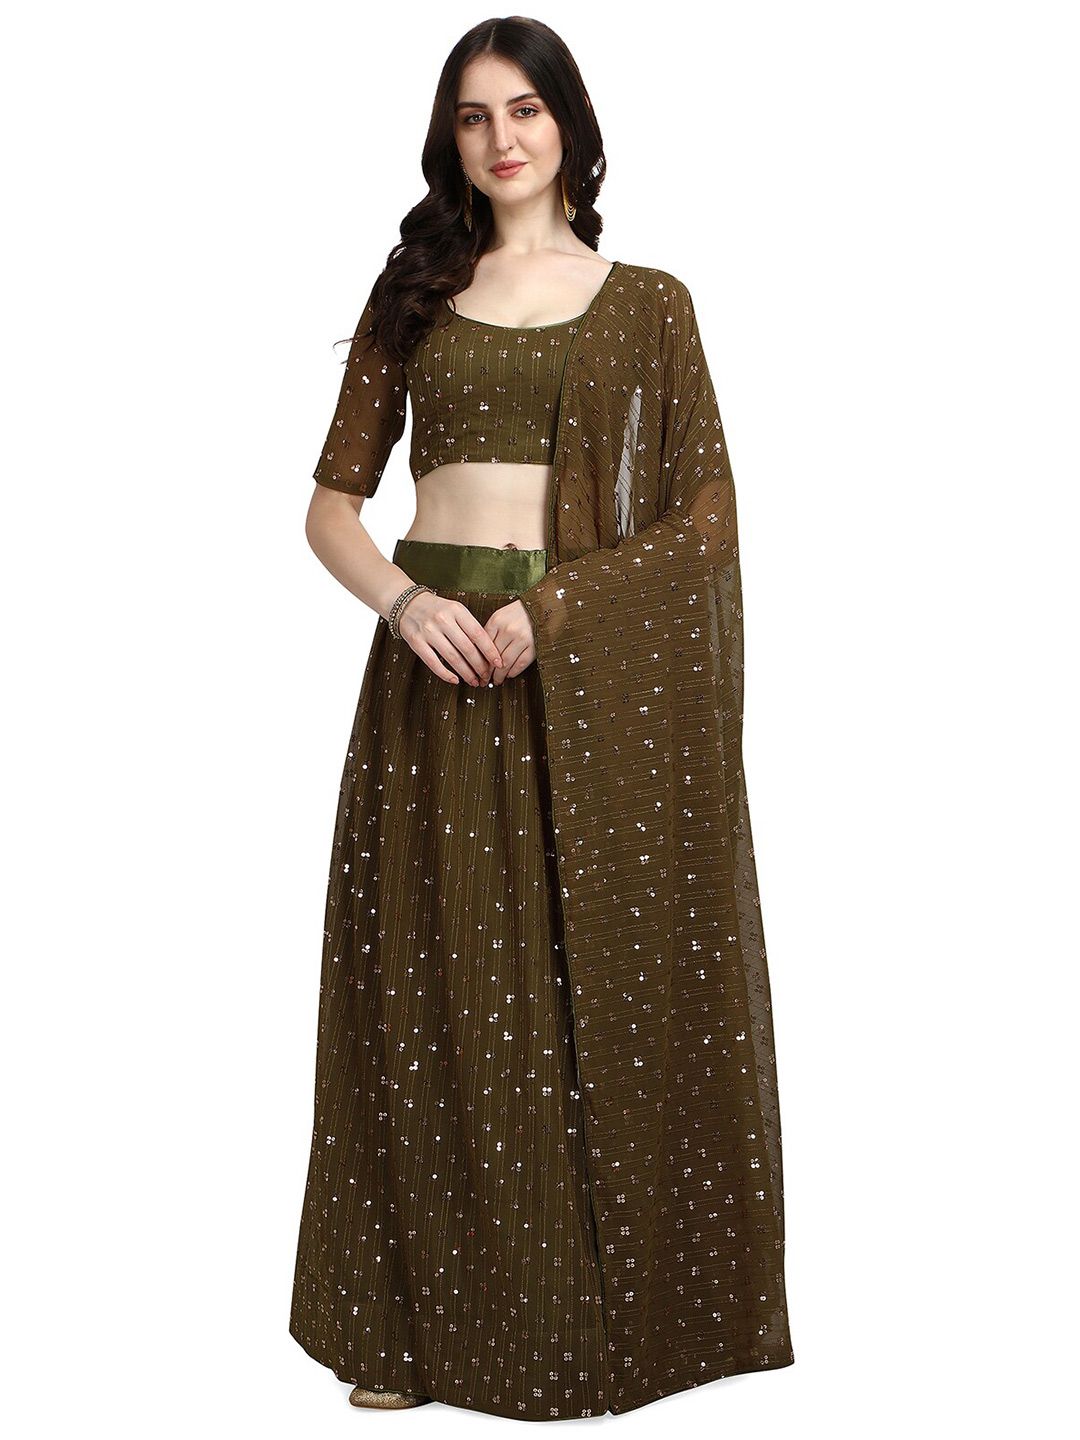 Pratham Blue Olive Green Embellished Sequinned Semi-Stitched Lehenga & Unstitched Blouse With Dupatta Price in India